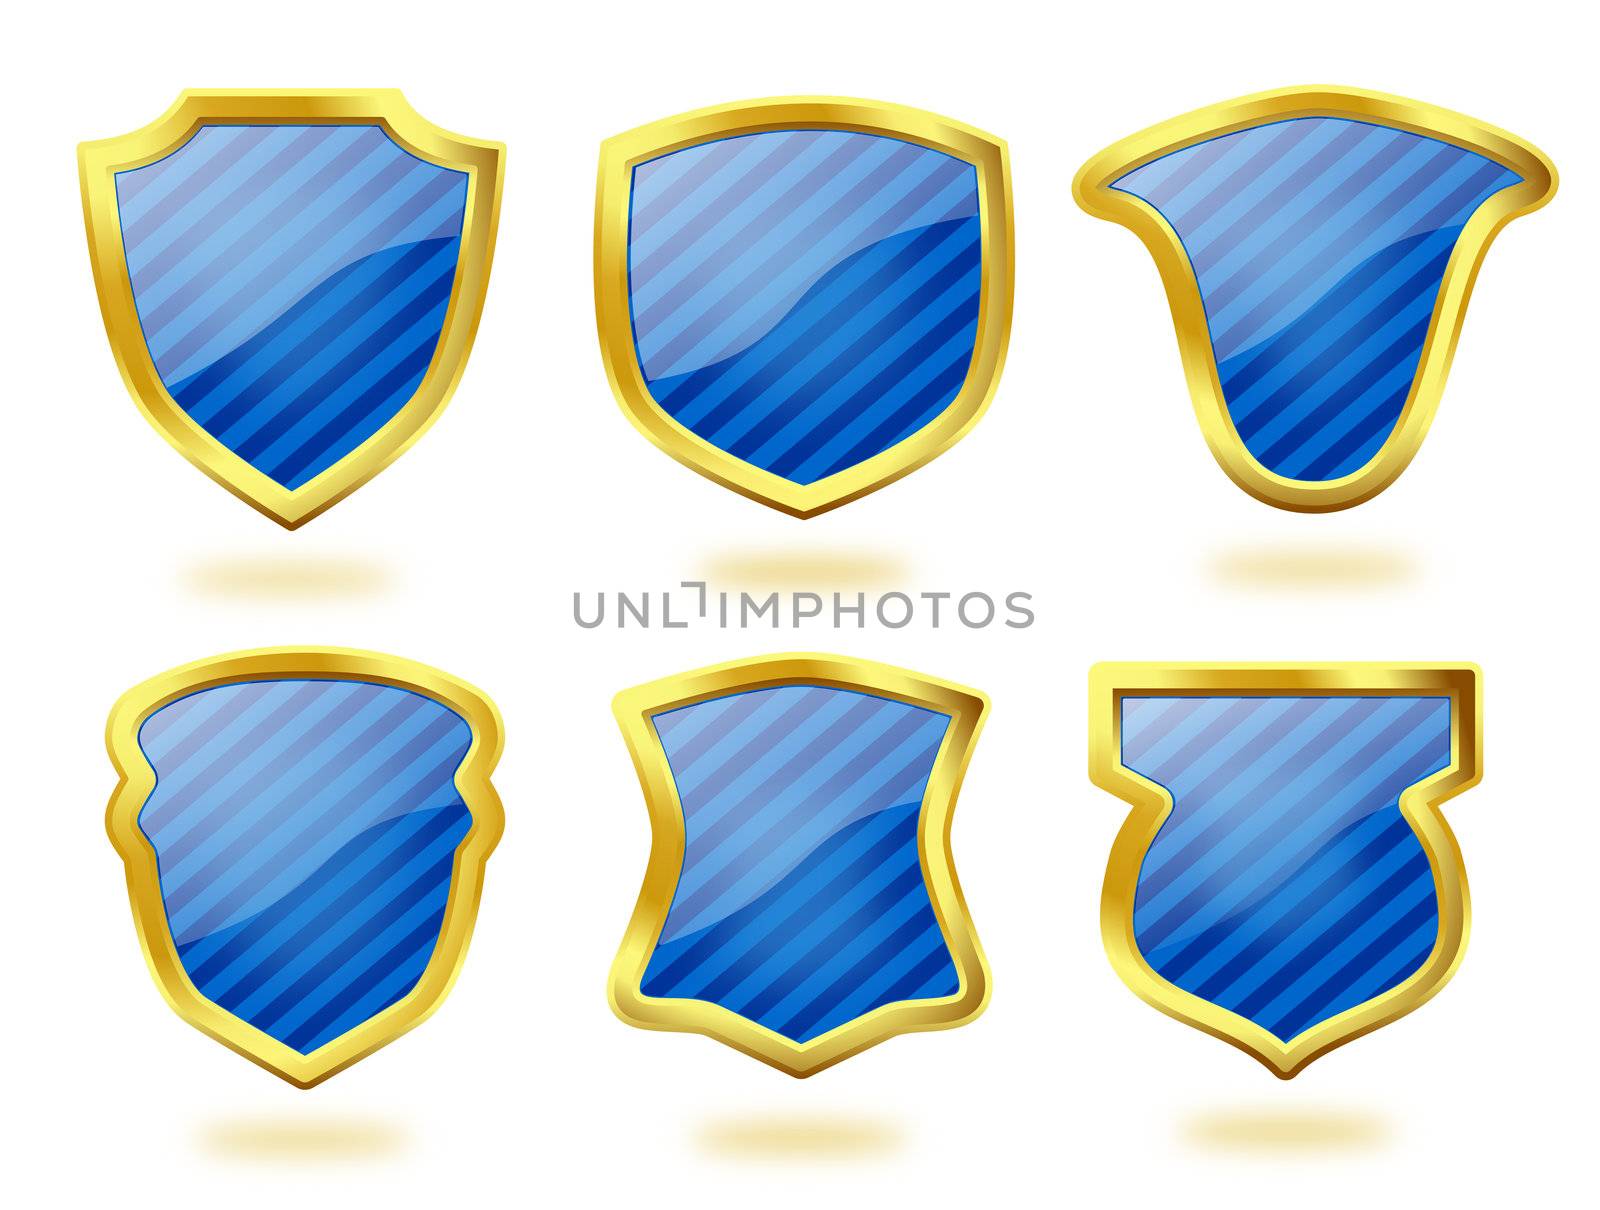 Striped Blue Shields with Golden Frames by RichieThakur